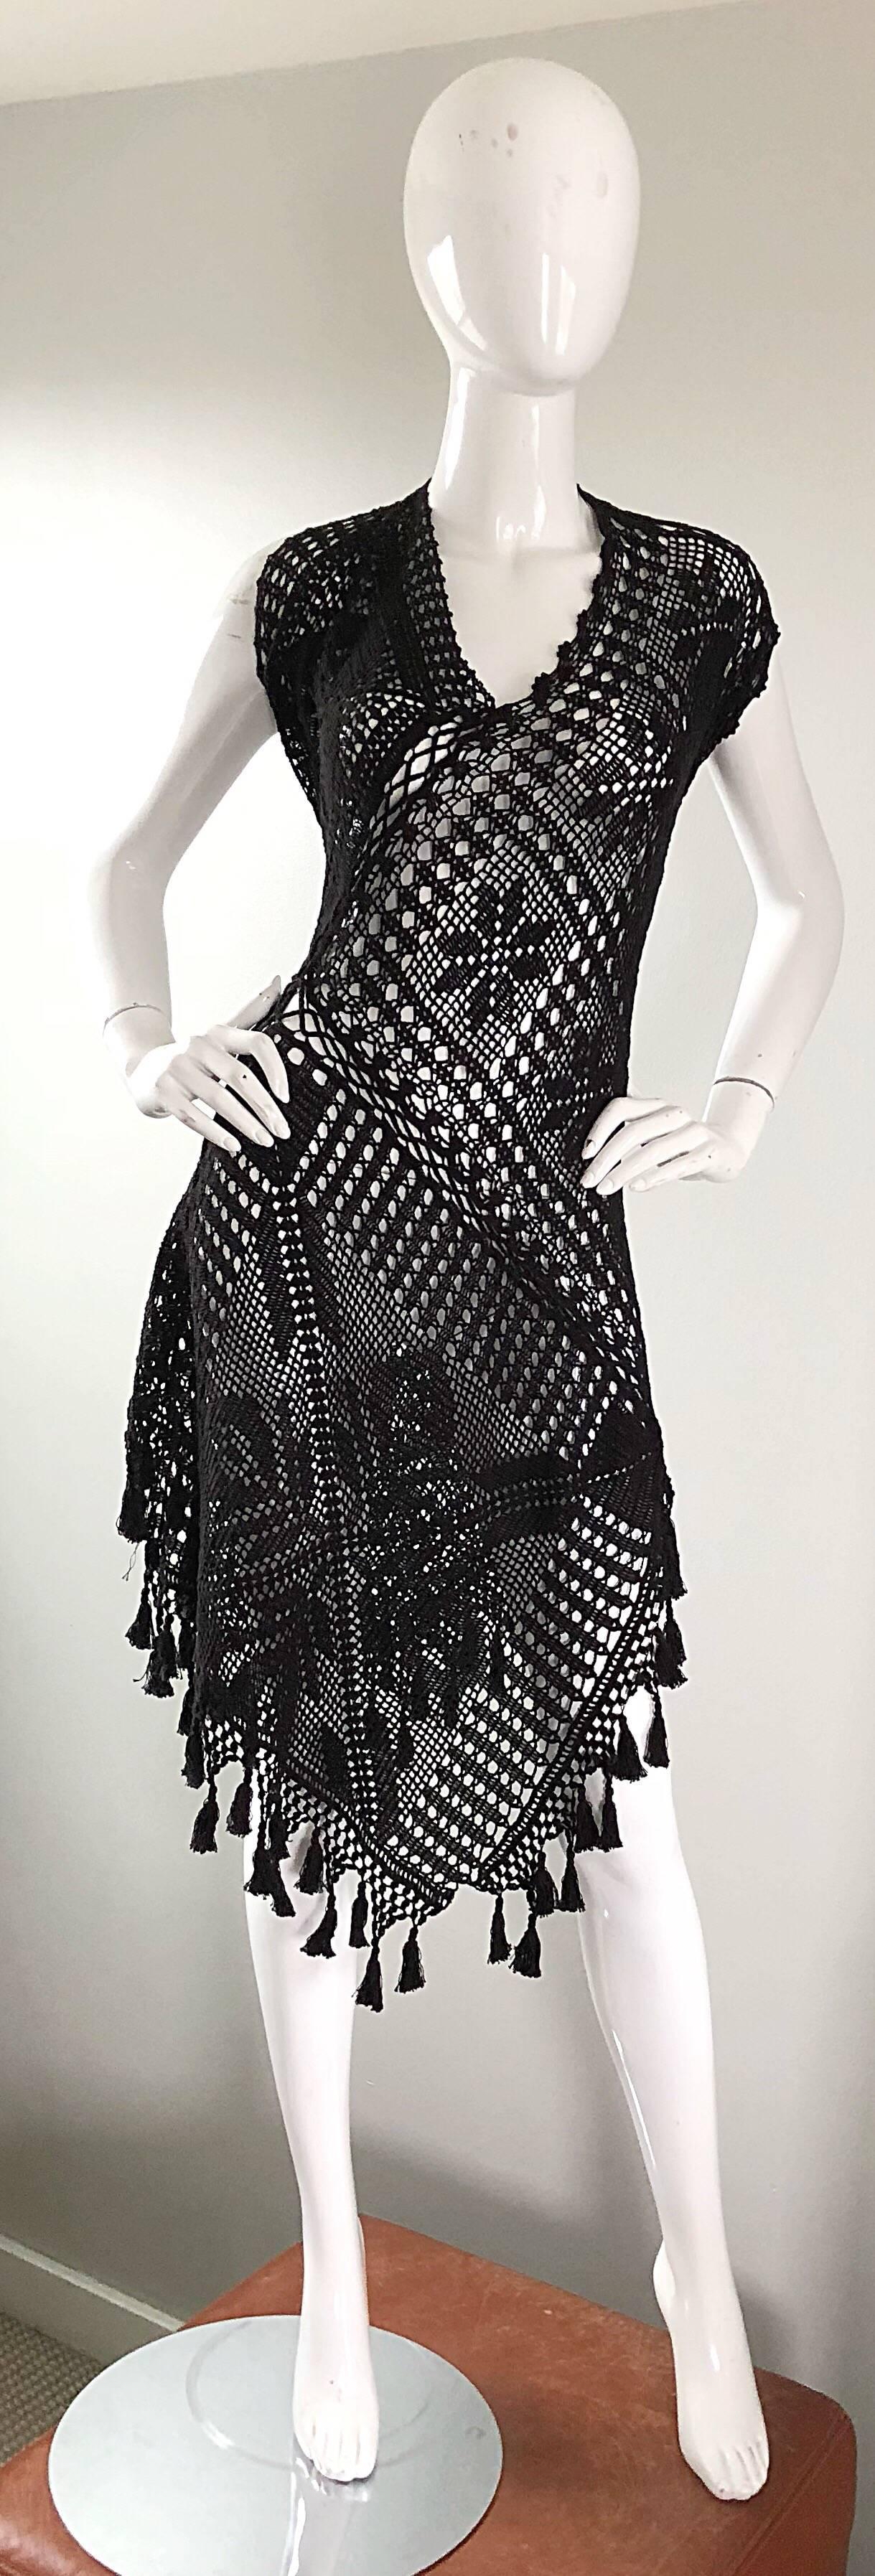 Rare and iconic 90s JEAN PAUL GAULTIER black hand crochet poncho tunic halter dress! Features asymmetrical hand-sewn crochet, with handkerchief hem, and attached fringe pom-poms at hem. Can be worn multiple ways--covering the shoulders, bunched up